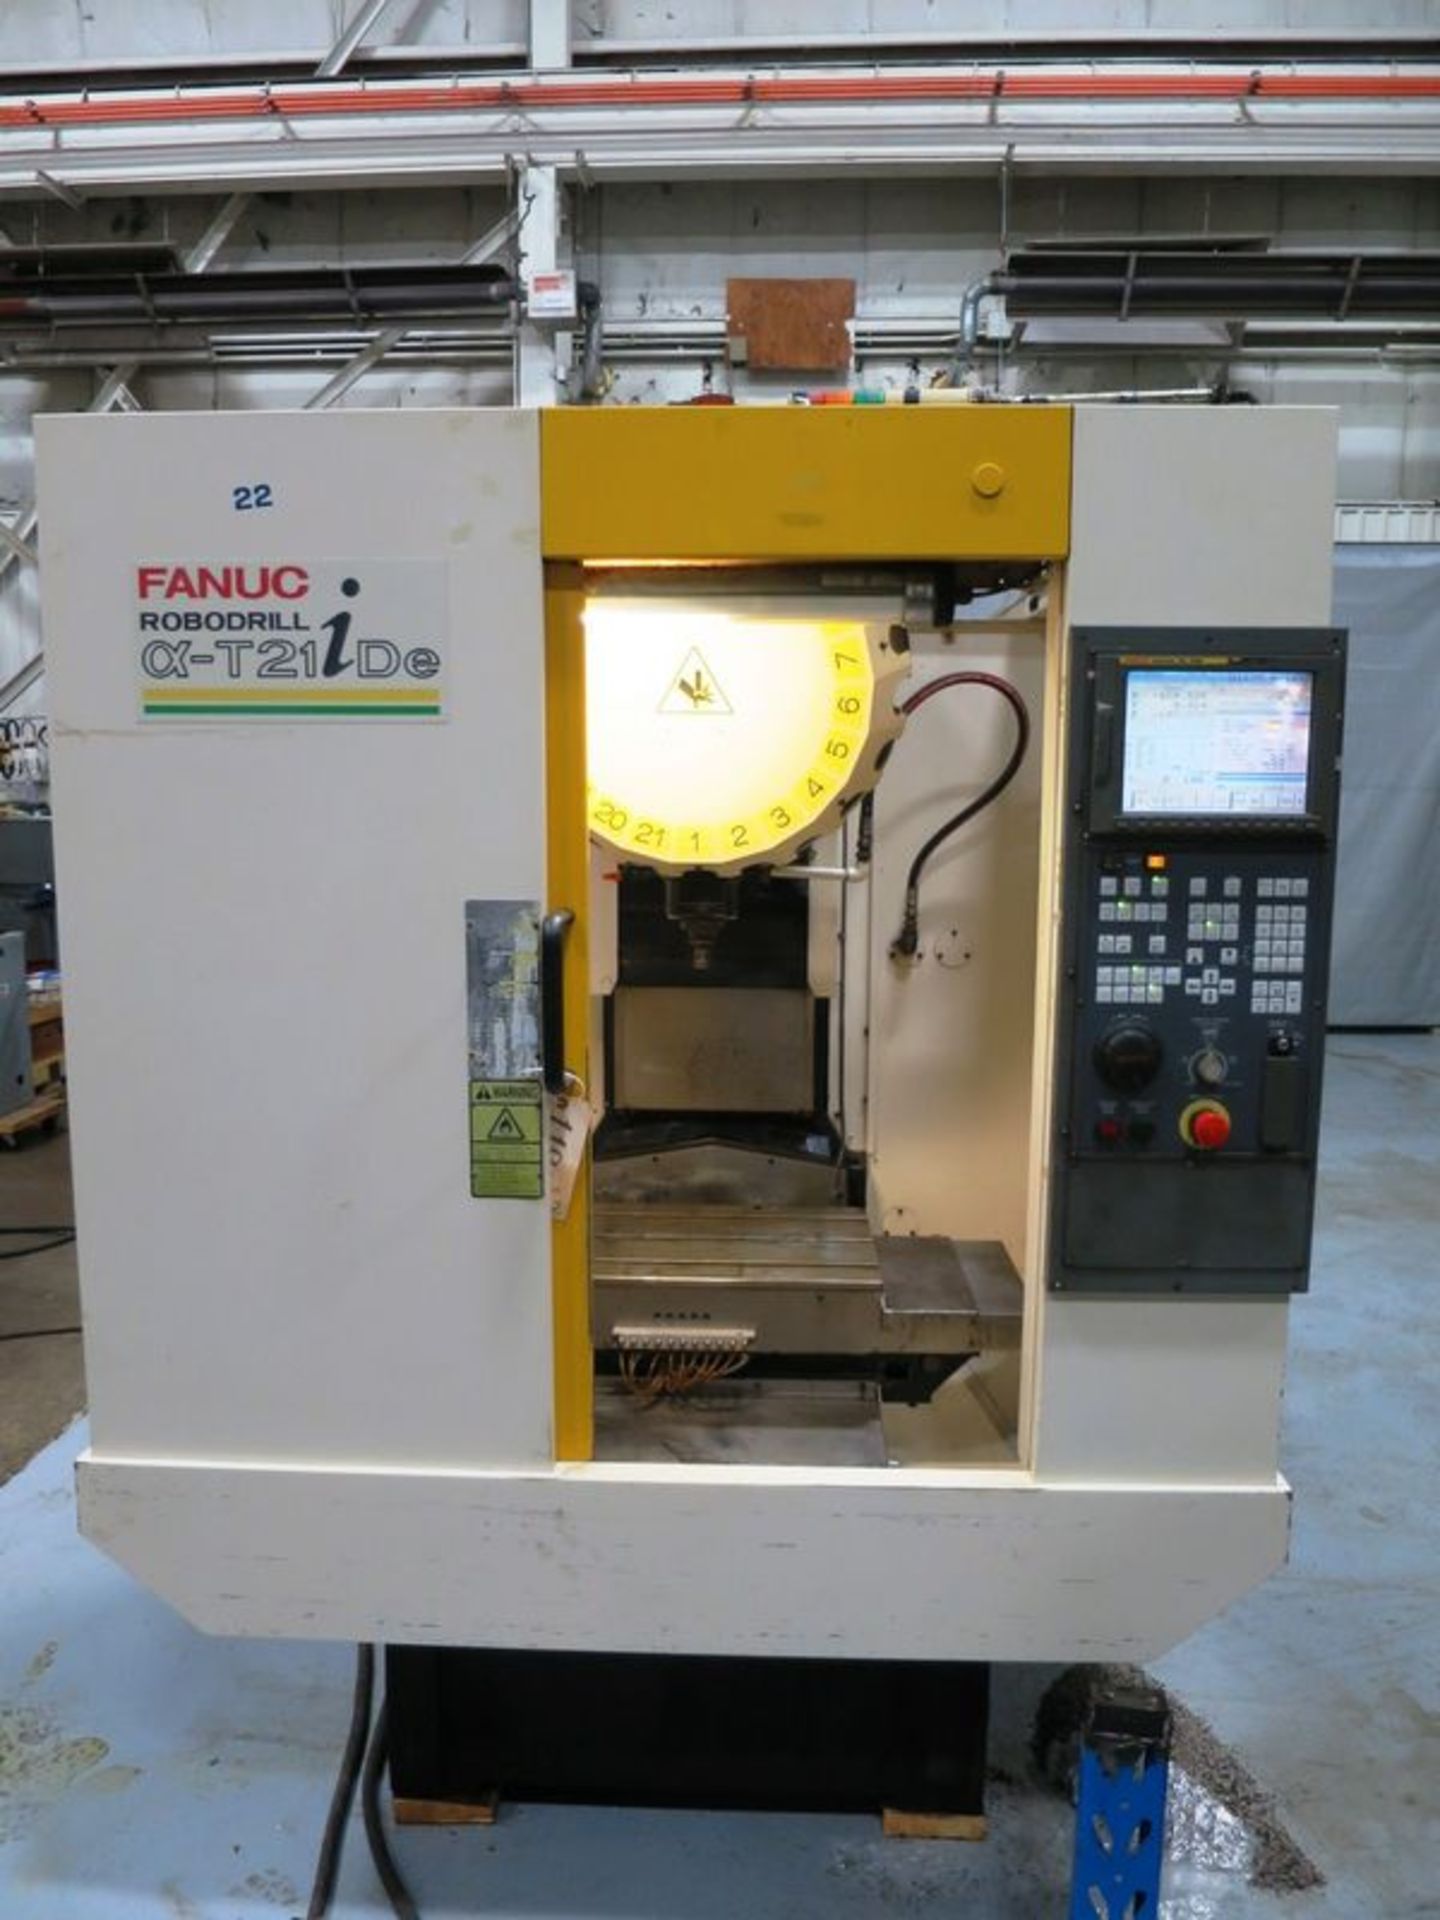 Fanuc Robodrill Alpha T21iDE 3-Axis Vertical High Speed Drill Tap Machining Center, S/N PO8UR381